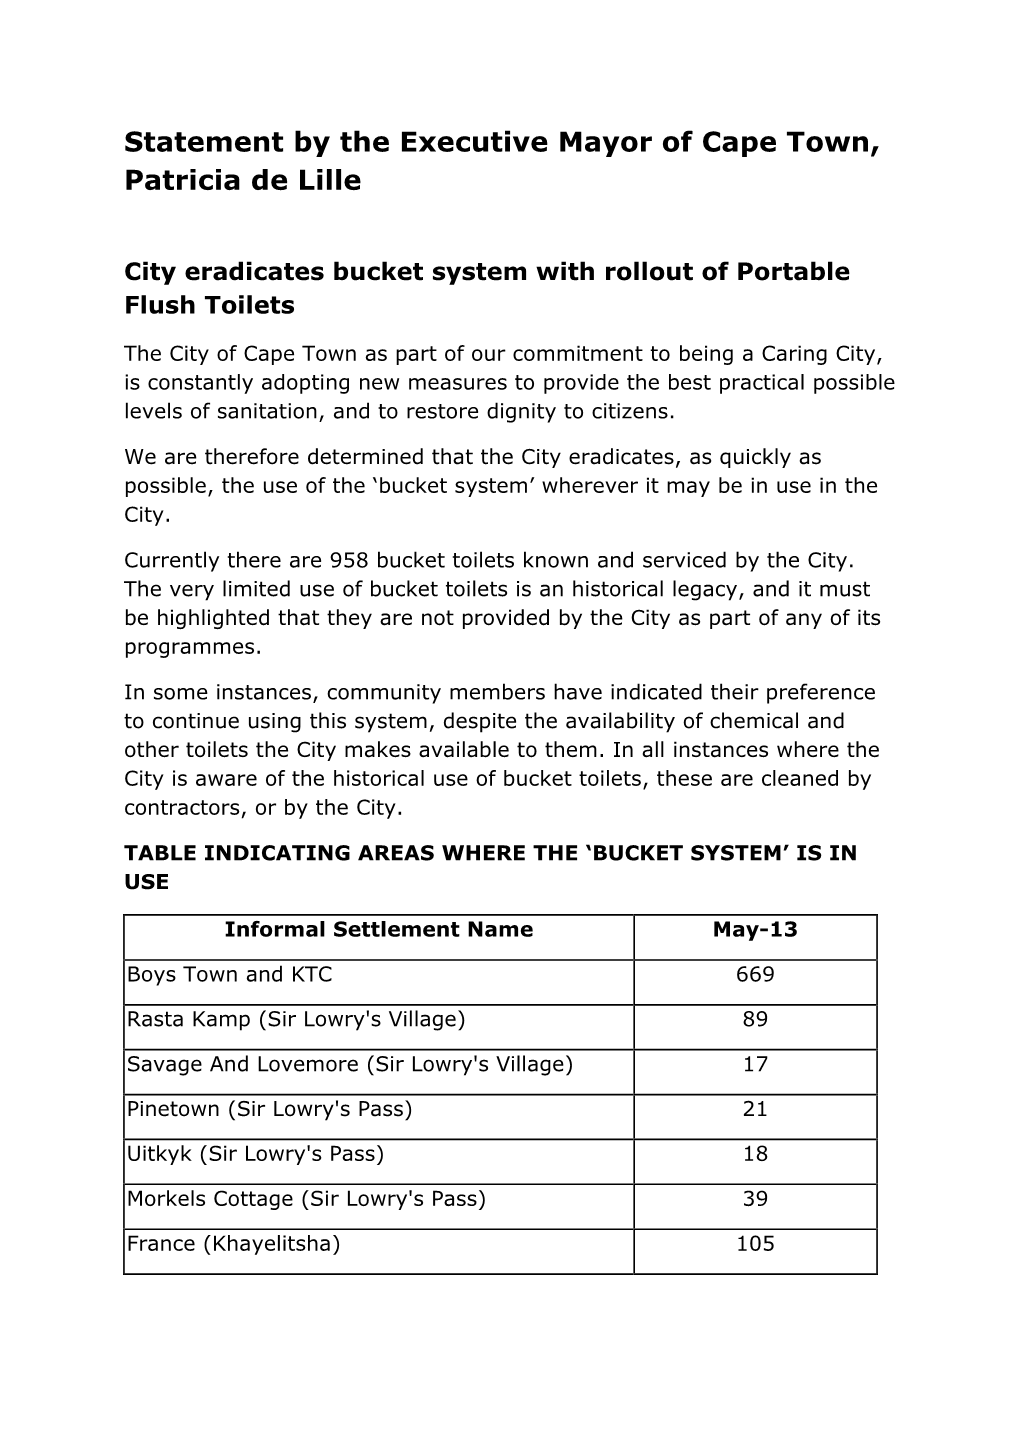 City Eradicates Bucket System with Rollout of Portable Flush Toilets